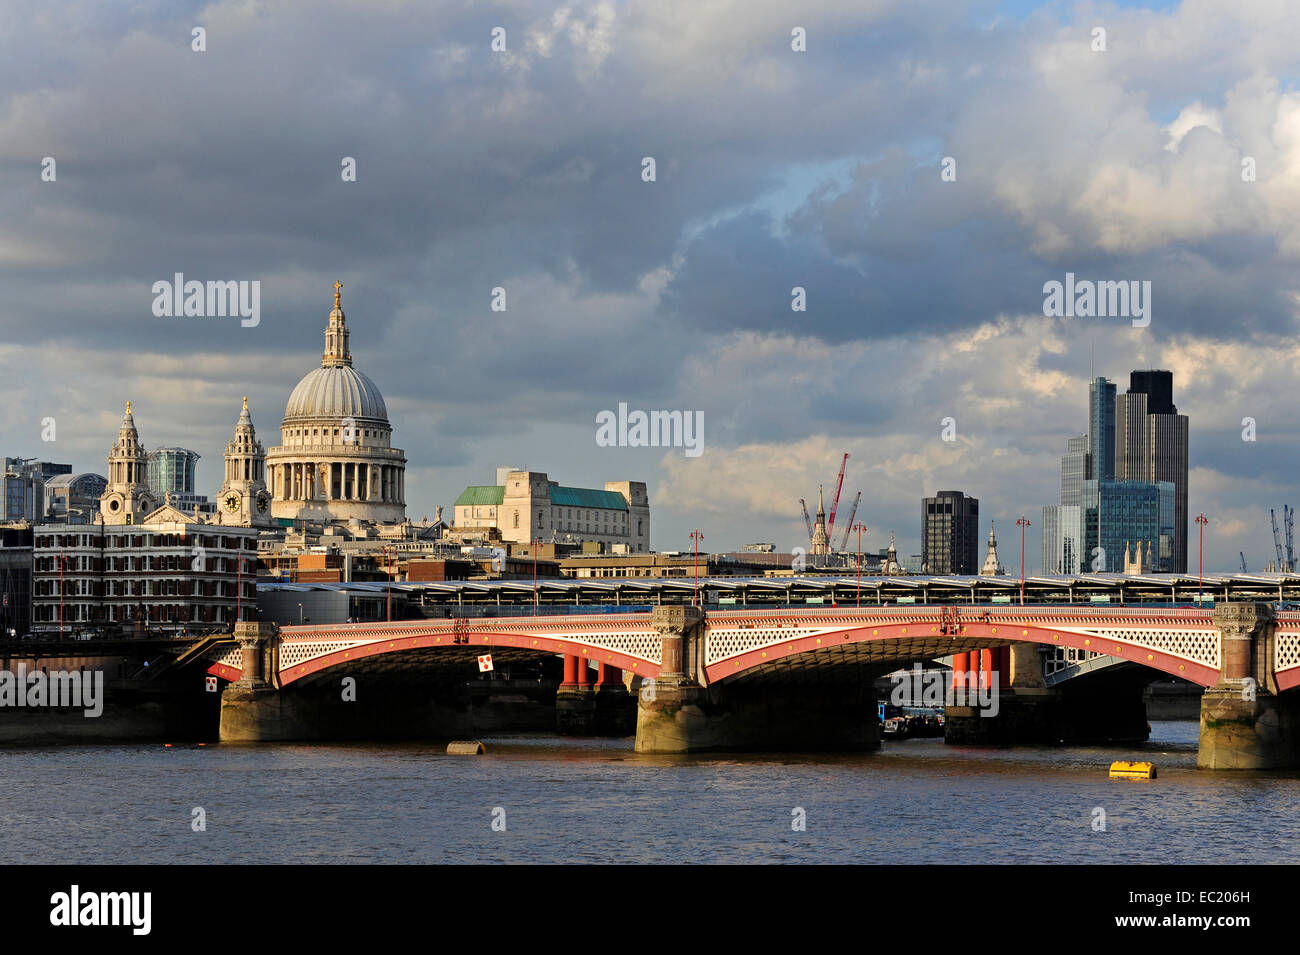 St. Paul's Cathedral, Blackfriars Bridge crossing the River Thames, City of London, London, England, United Kingdom Stock Photo